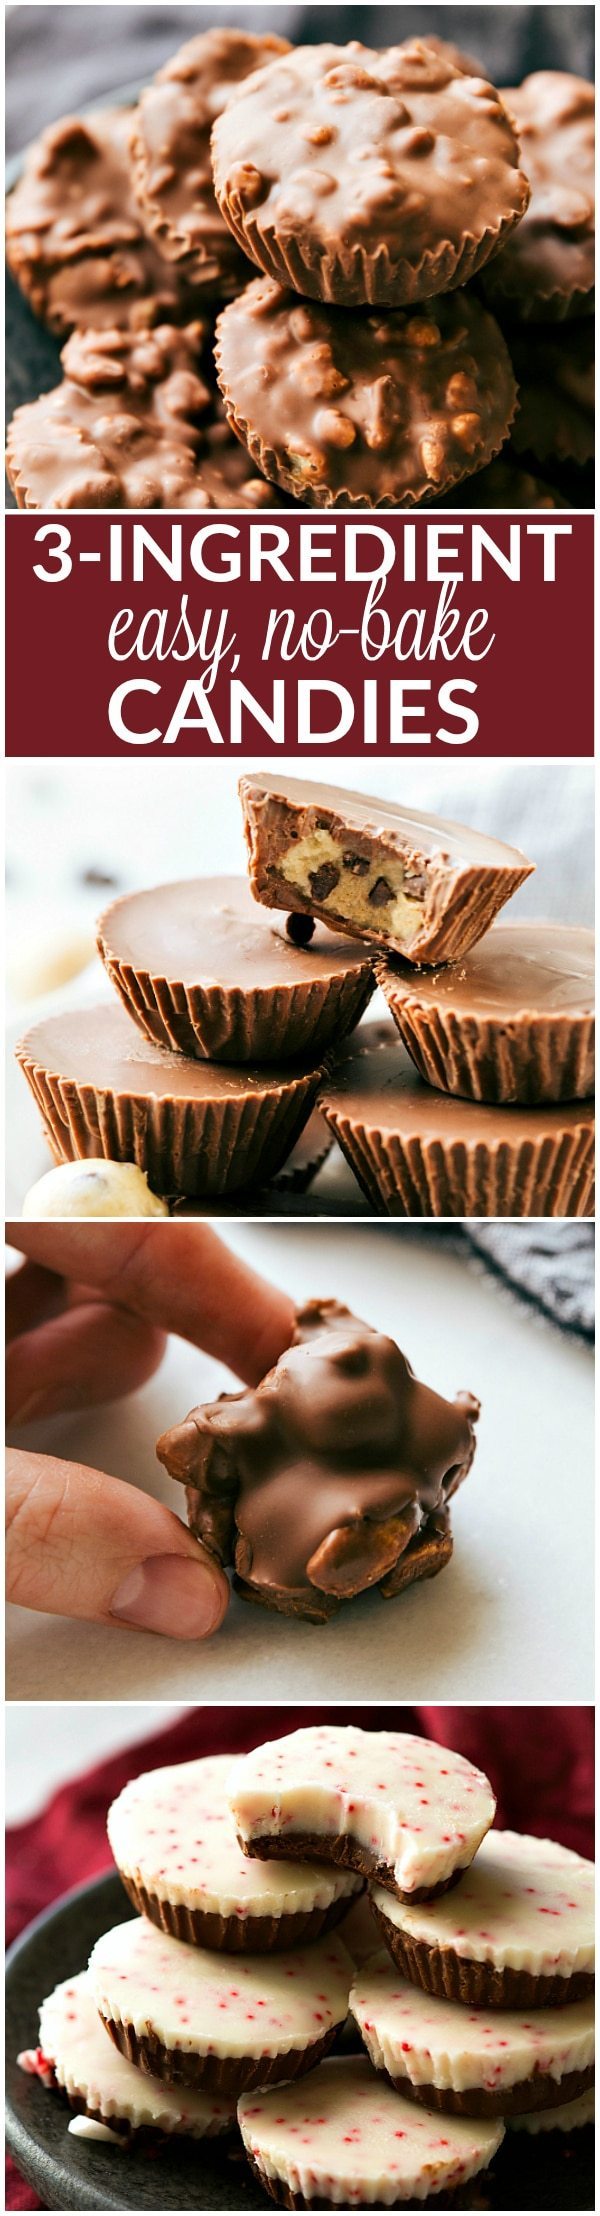 A collection of four different MUFFIN TIN TREATS all with just 3-ingredients. Peppermint Bark Bites, Cookie Dough Cups, Crunch Cups, & Easy Peanut Clusters. No baking required! Perfect for sharing with friends/family, giving out as gifts, bringing into work, or enjoying yourself! via chelseasmessyapron.com